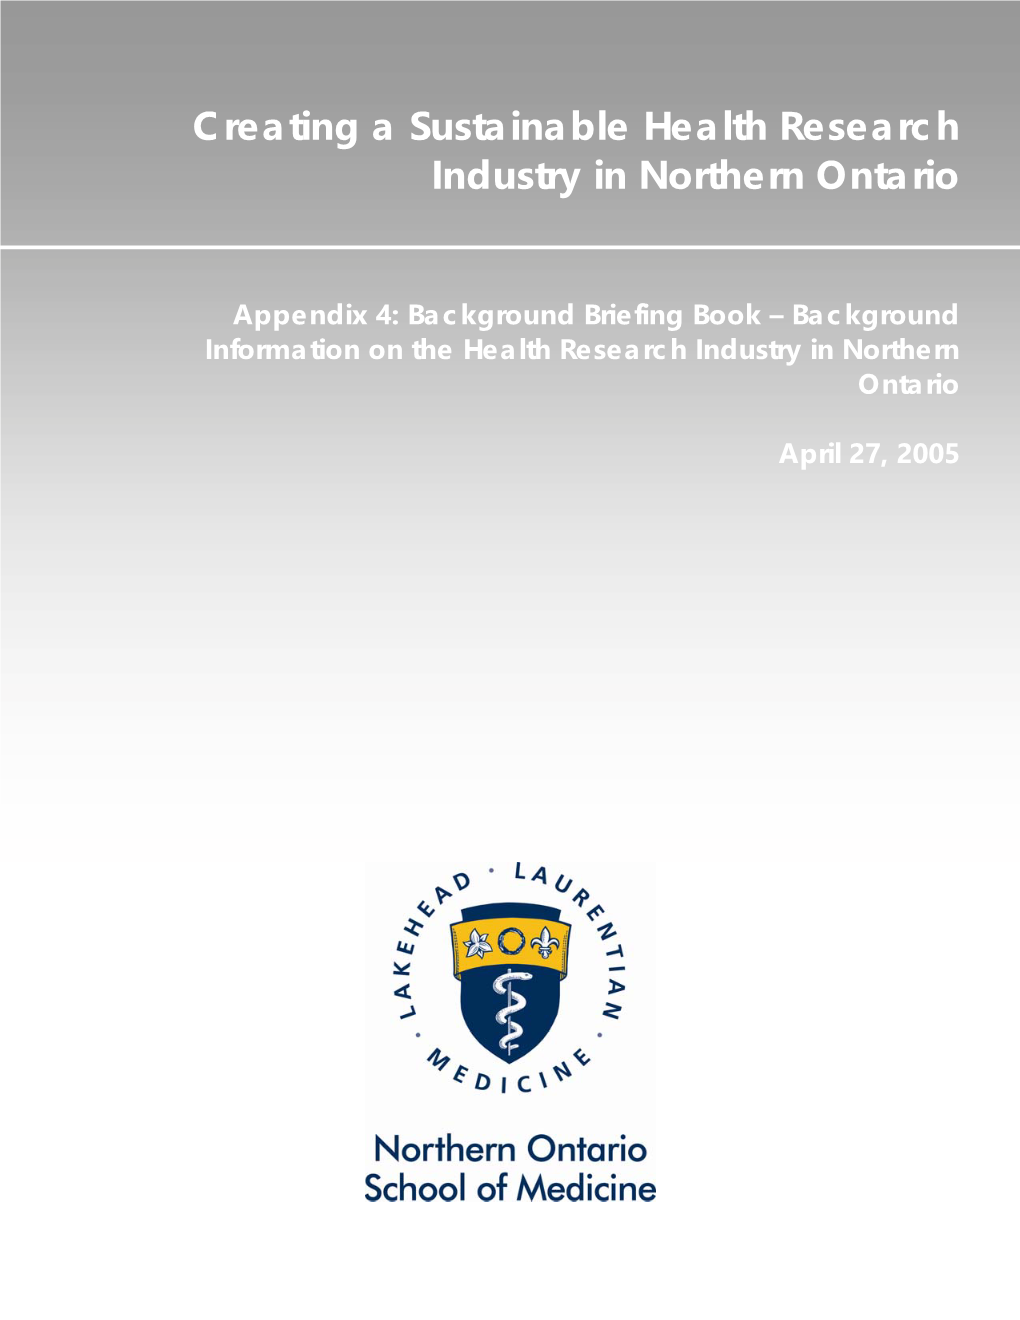 Creating a Sustainable Health Research Industry in Northern Ontario